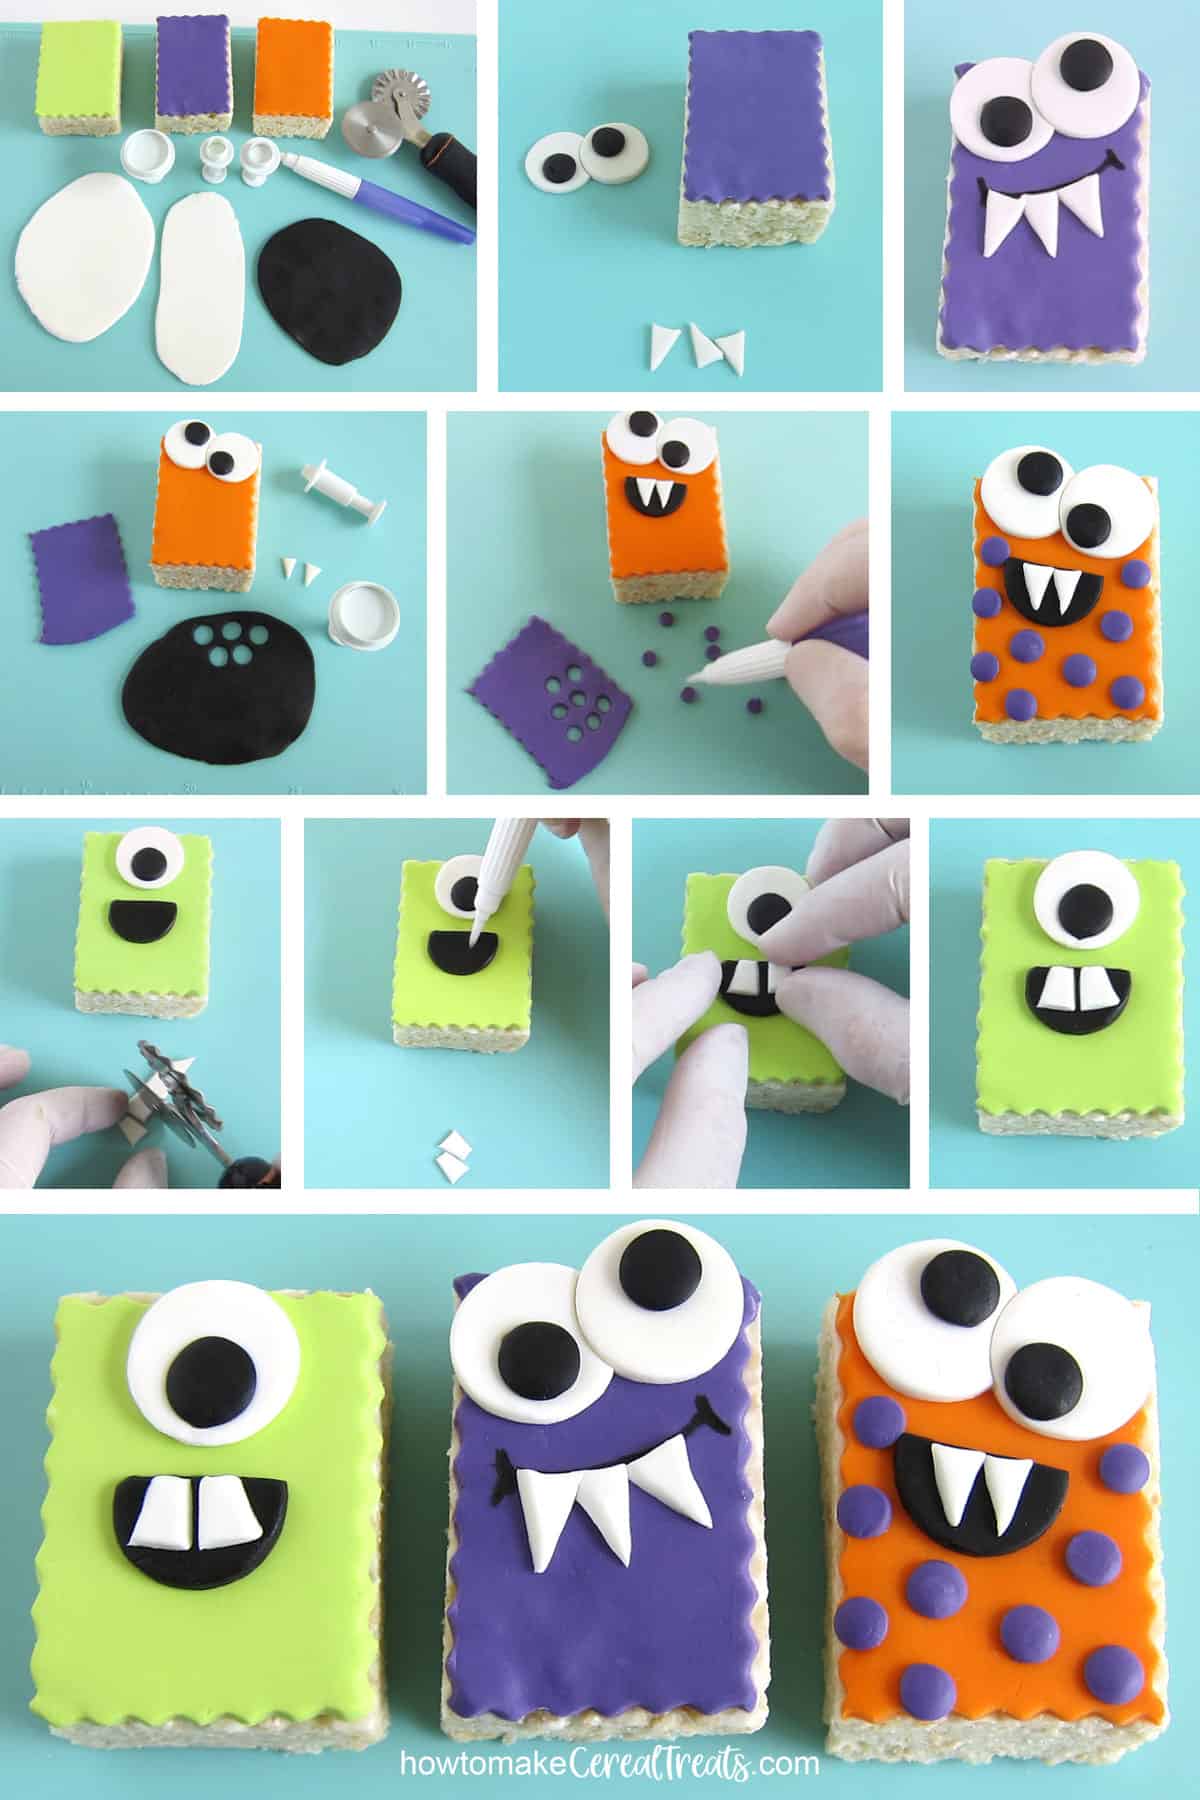 Decorate rice crispy treats with modeling chocolate eyes, fangs, and polka dots to create cute monsters.